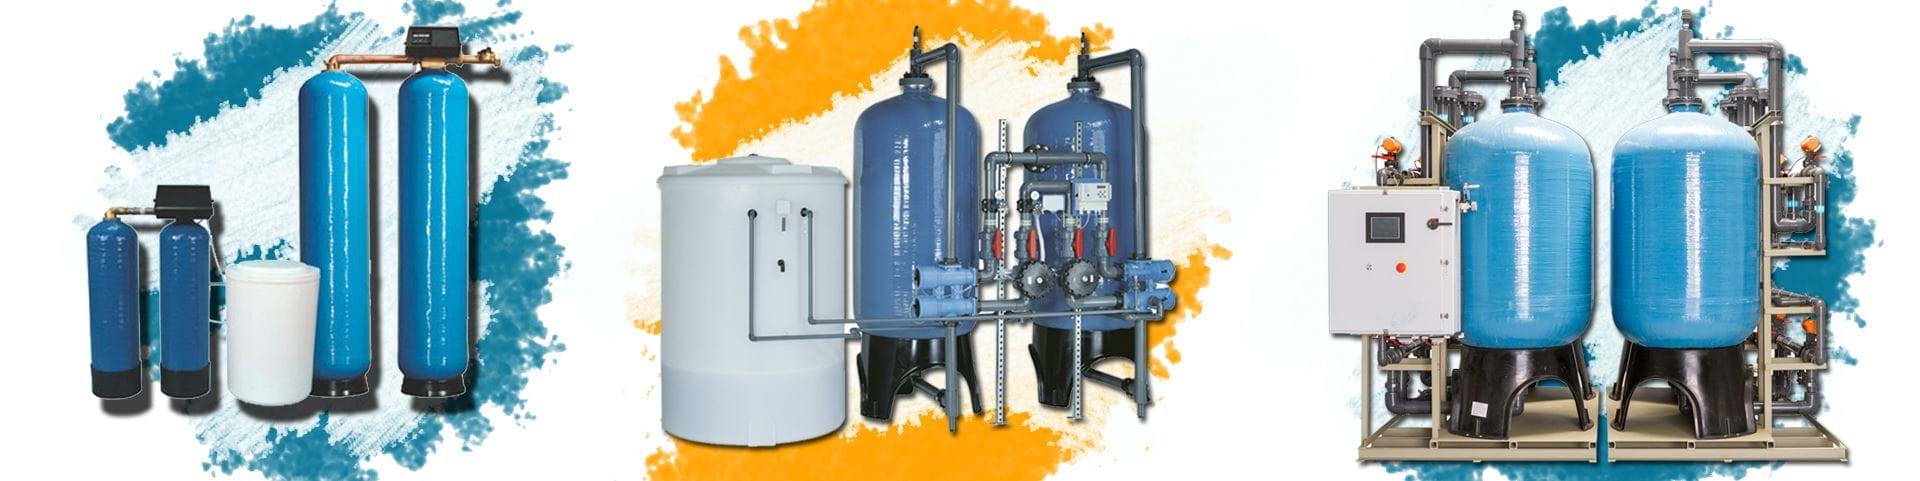 industrial water softeners ic